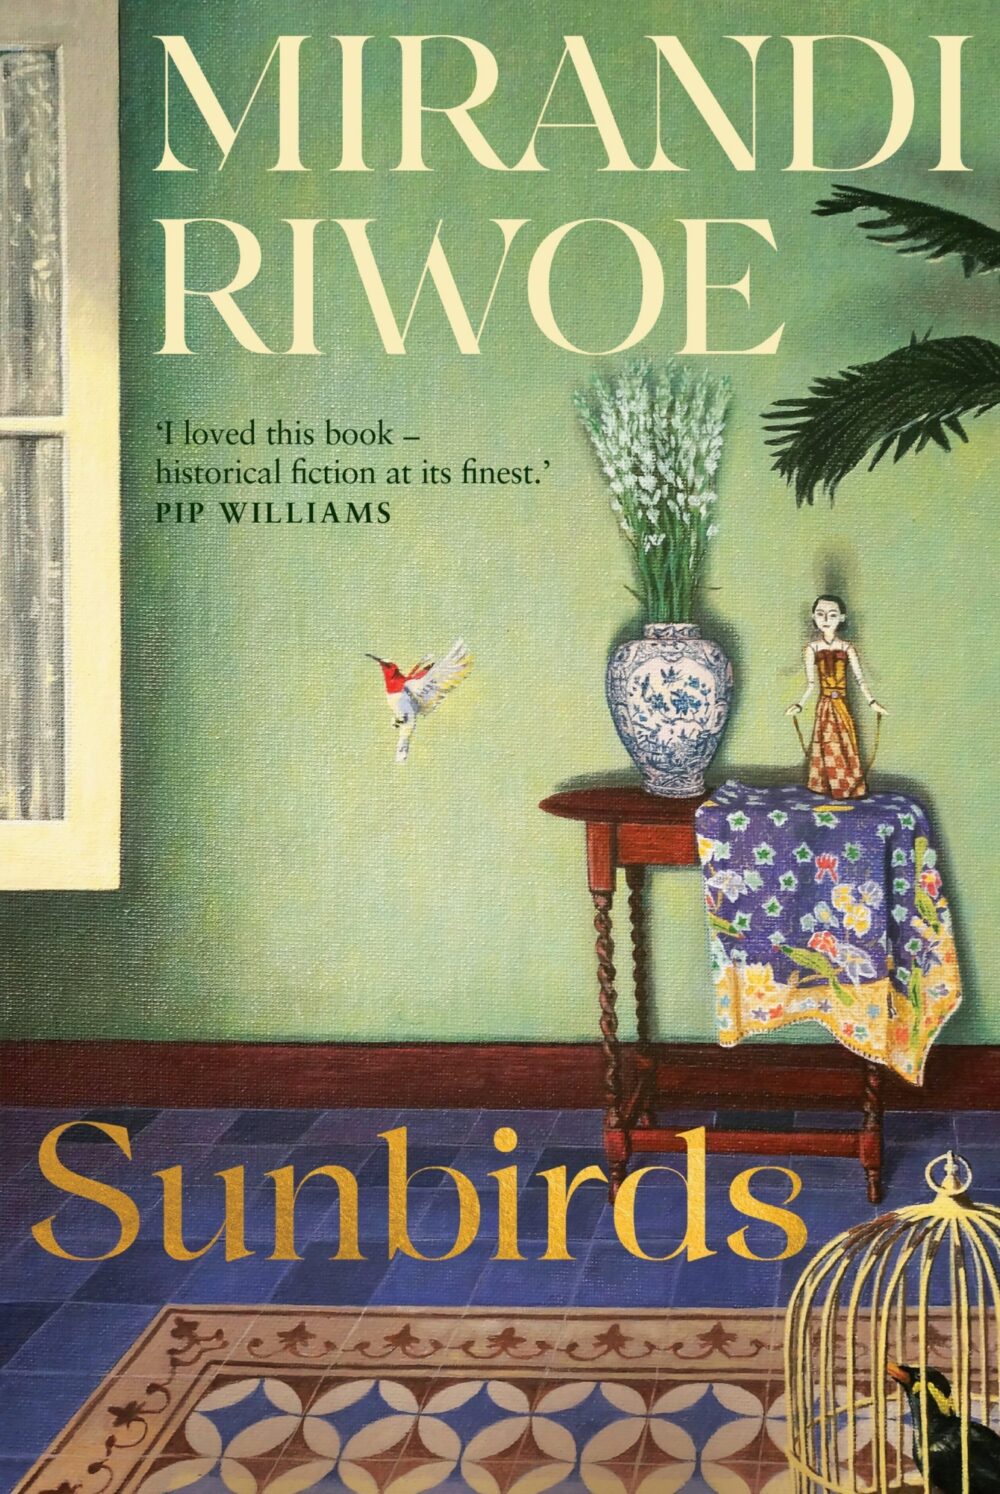 A book cover featuring an illustration of a room with a green wall and blue floor, and an end table with a vase of flower, a patterned cloth an a figurine.